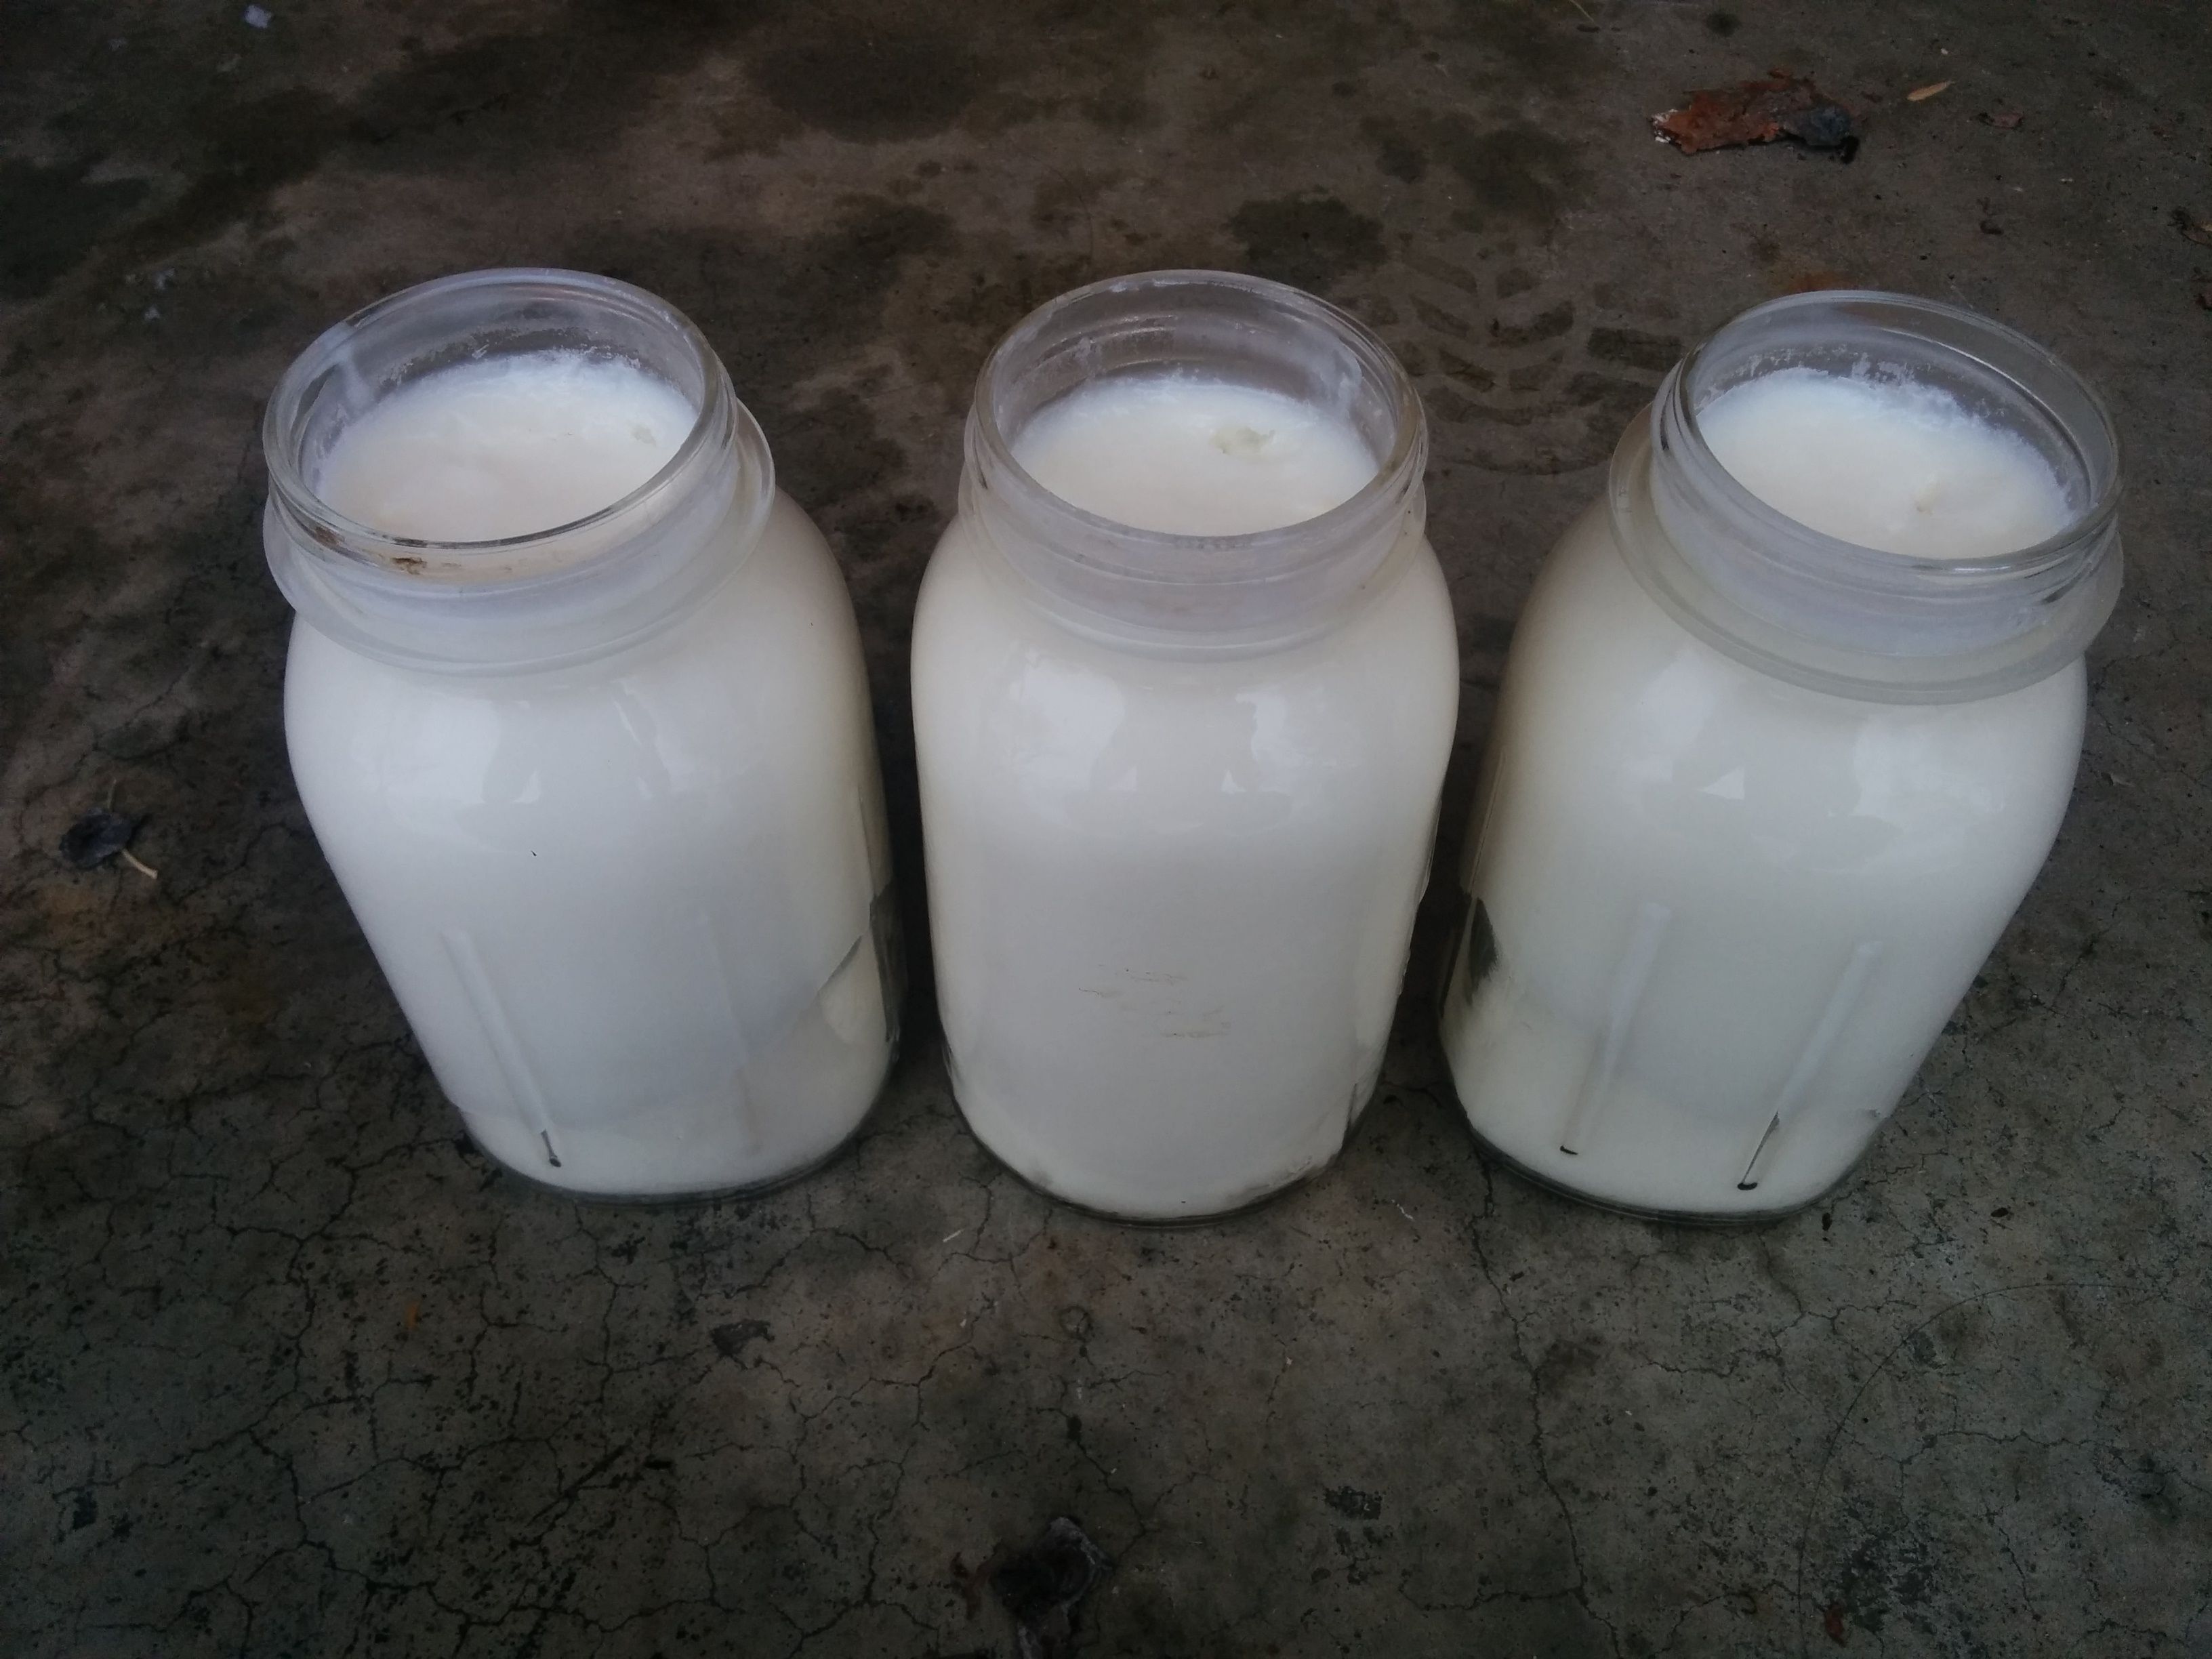 Rendering Tallow from Sheep Fat for Sustainable Cooking Fat, Candles, Soap  Leather Conditioning and More! — Steemit